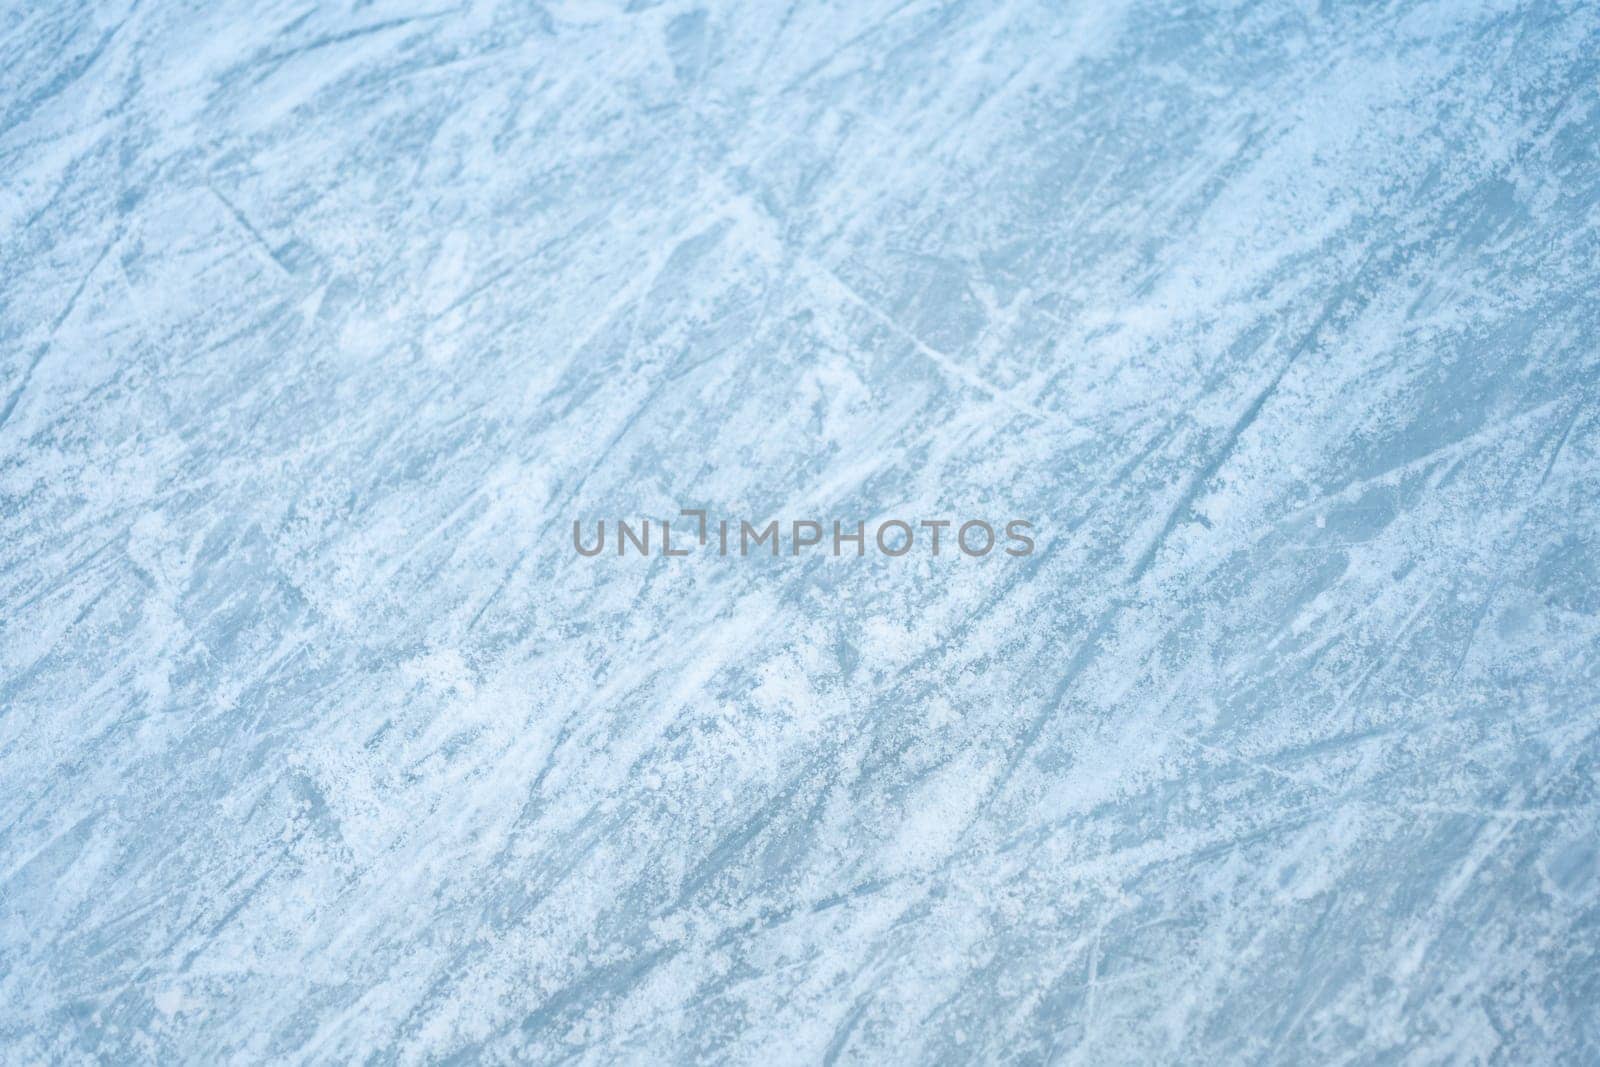 Winter frost patterns on glass. Ice crystals or cold winter background. Frozen snow window. Blue ice frost clings to glass, forming intricate patterns. Intricate and delicate designs created by frost